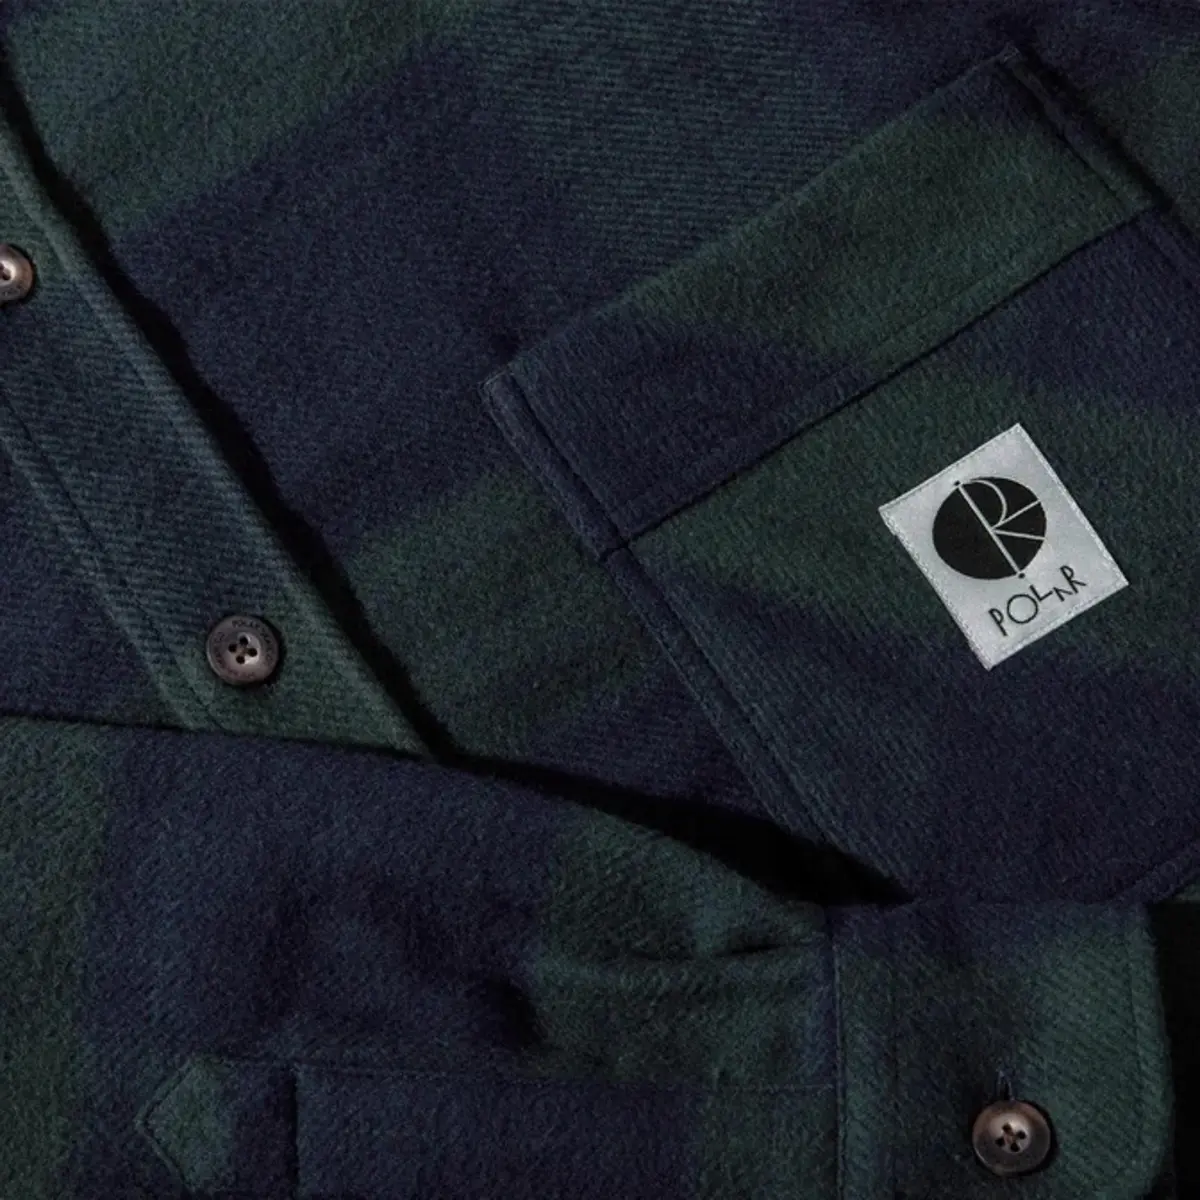 Polar Mike Ls Flannel Shirt Navy Teal